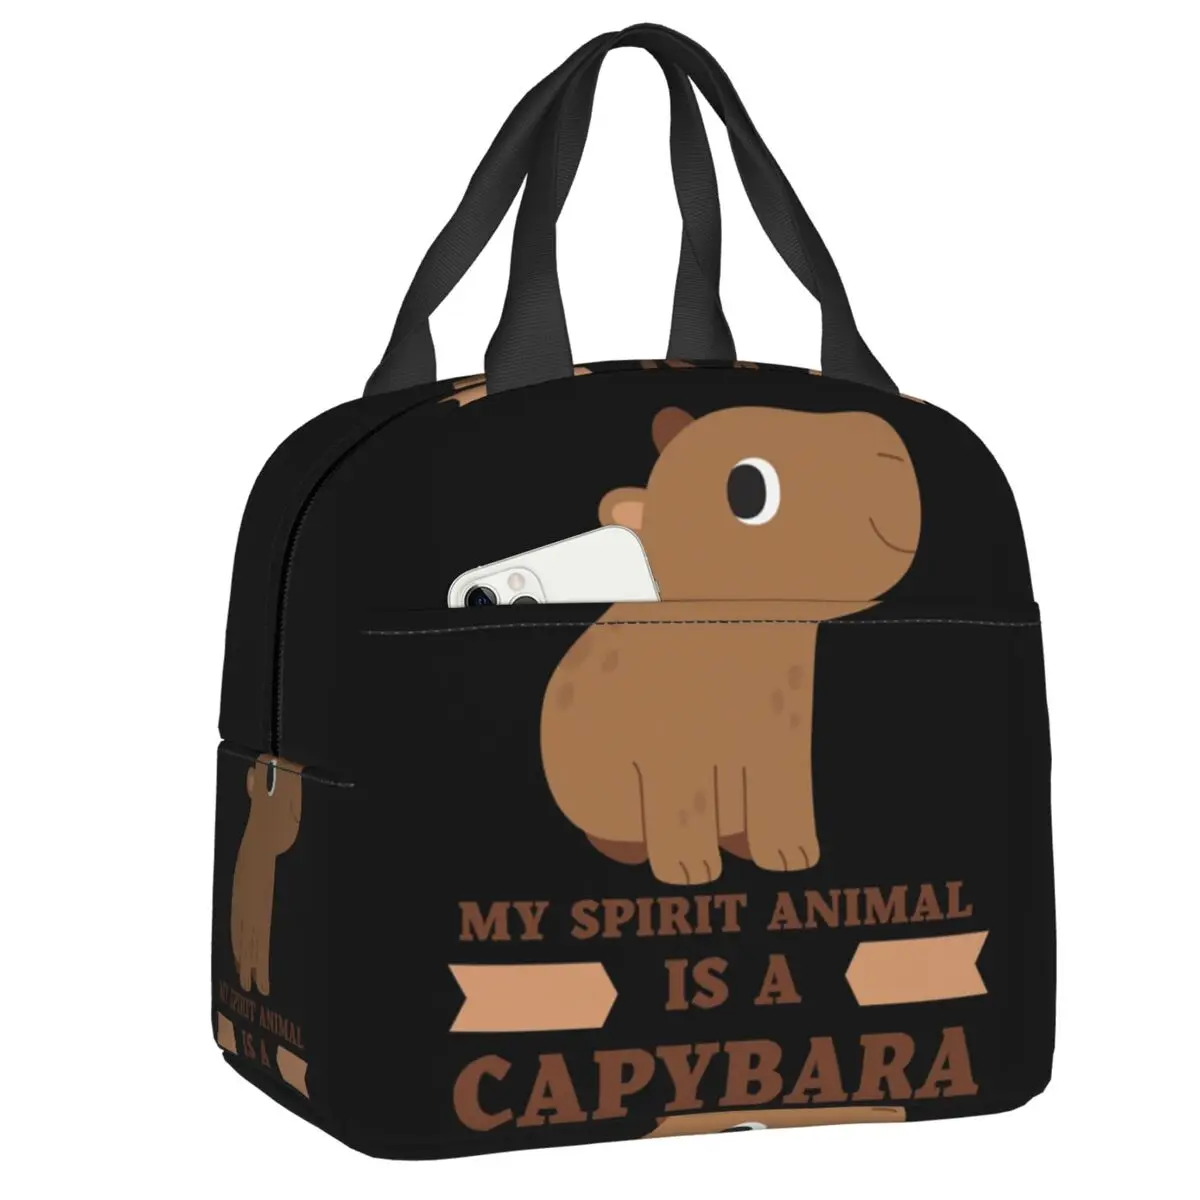 

My Spirit Animal Is A Capybara Lovers Insulated Lunch Bag for Women Leakproof Thermal Cooler Bento Box Kids School Children